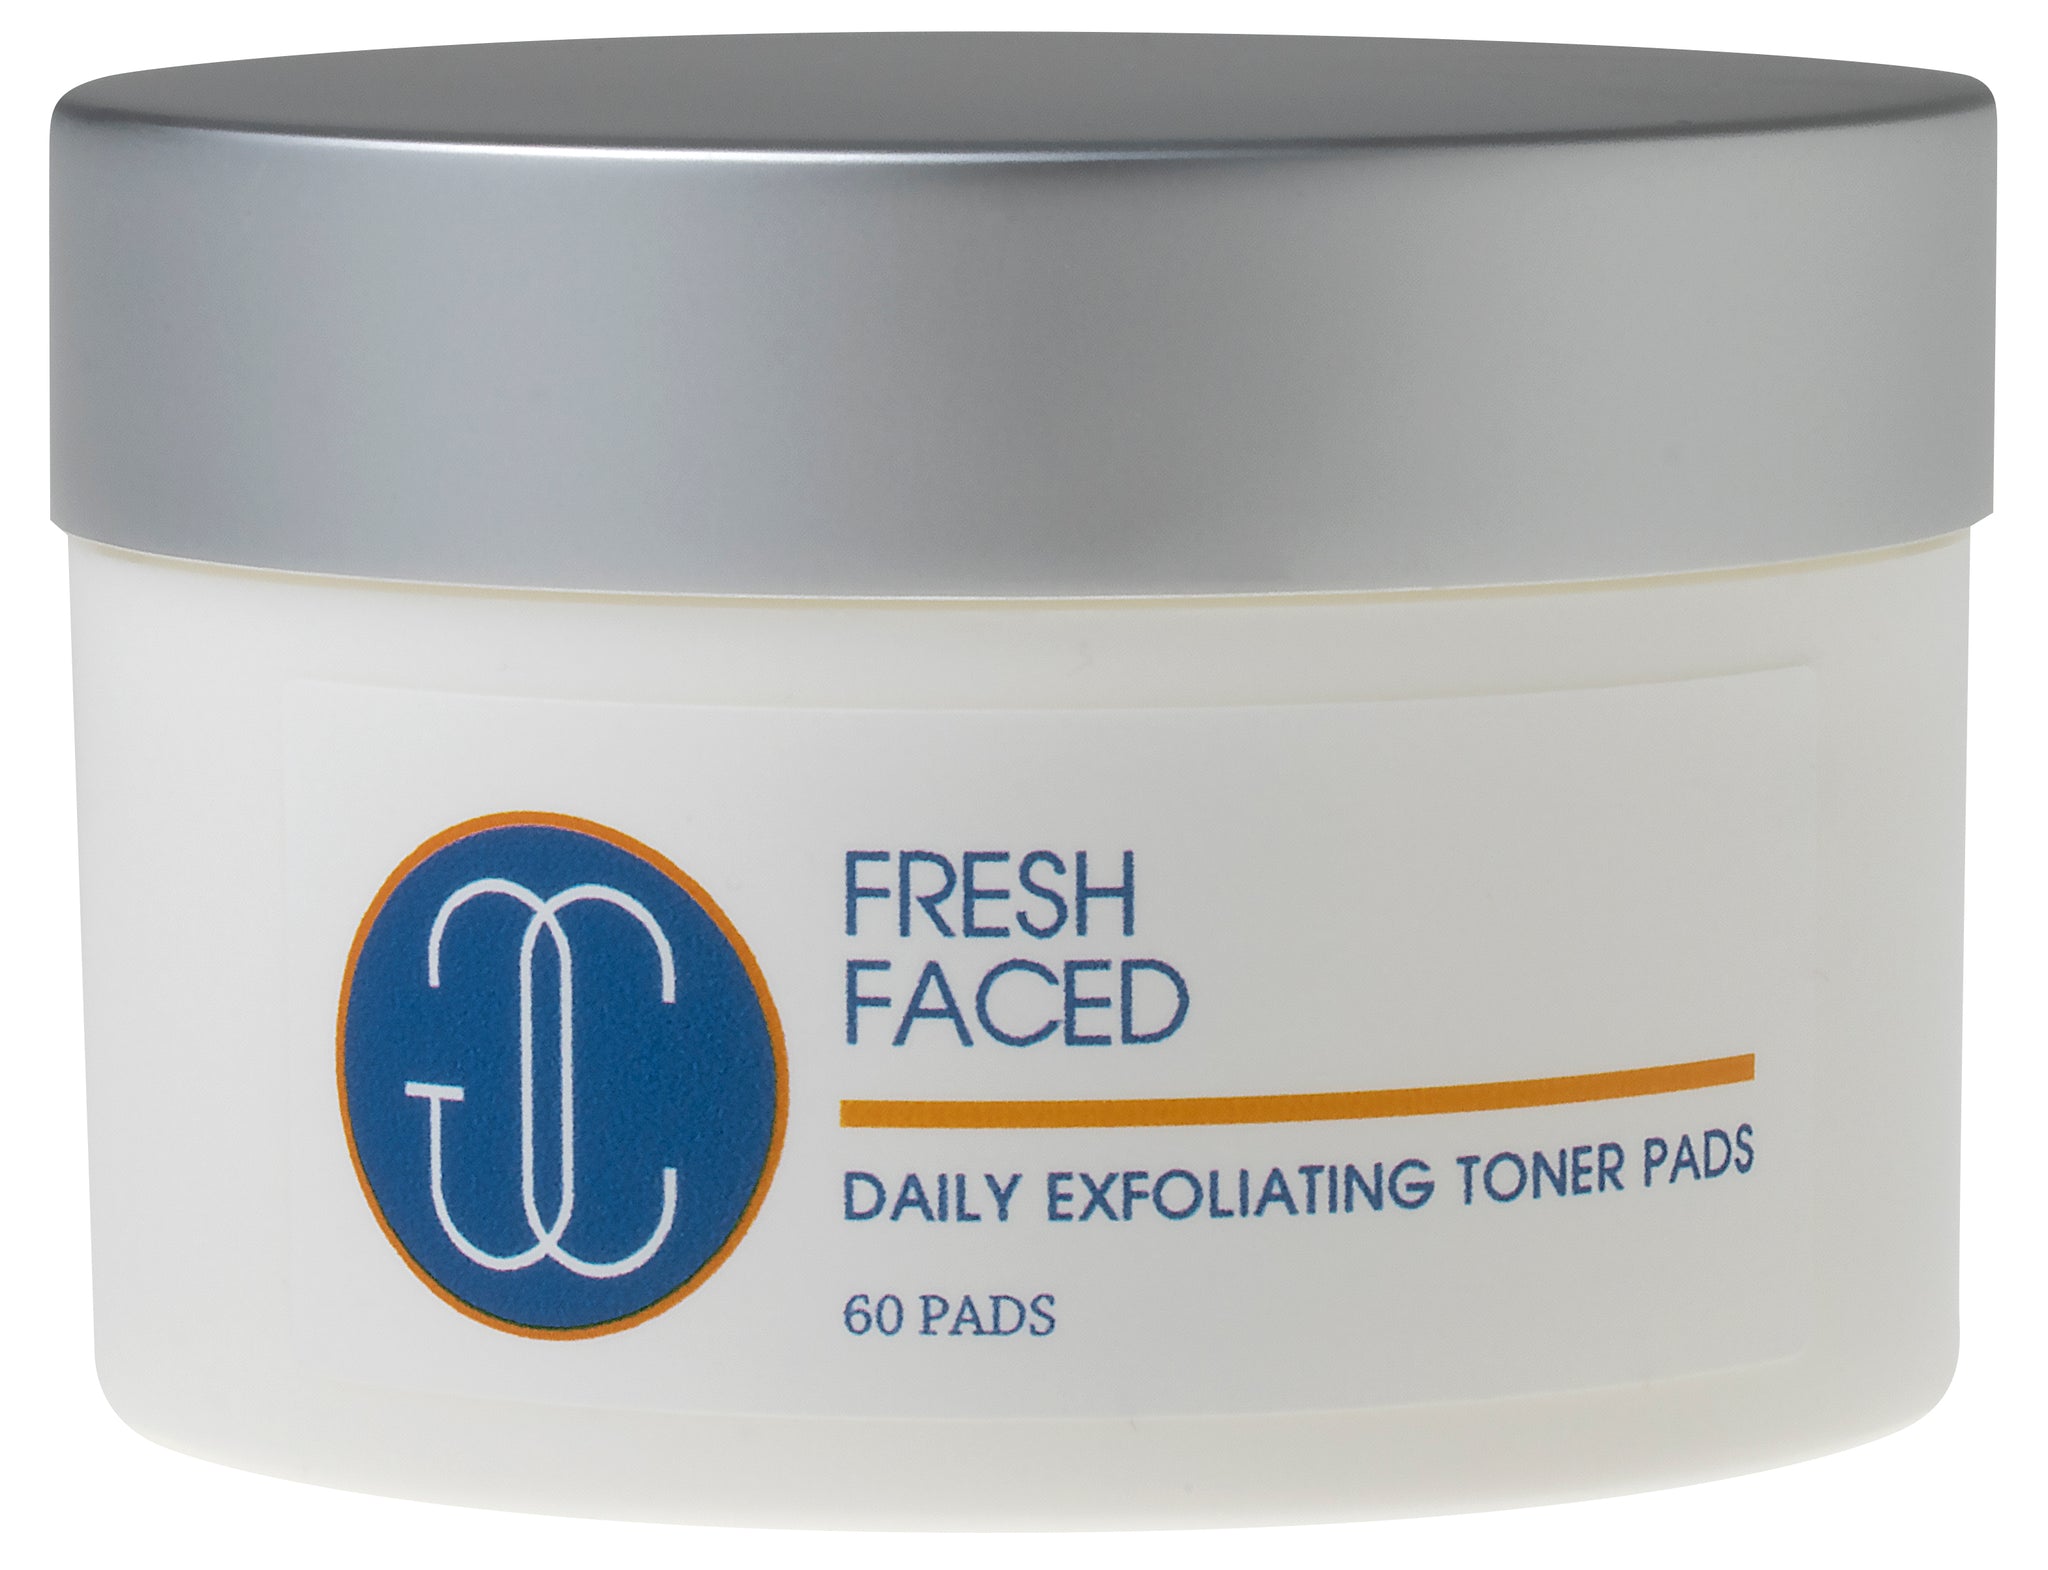 Fresh Faced Daily Exfoliating Toner Pads